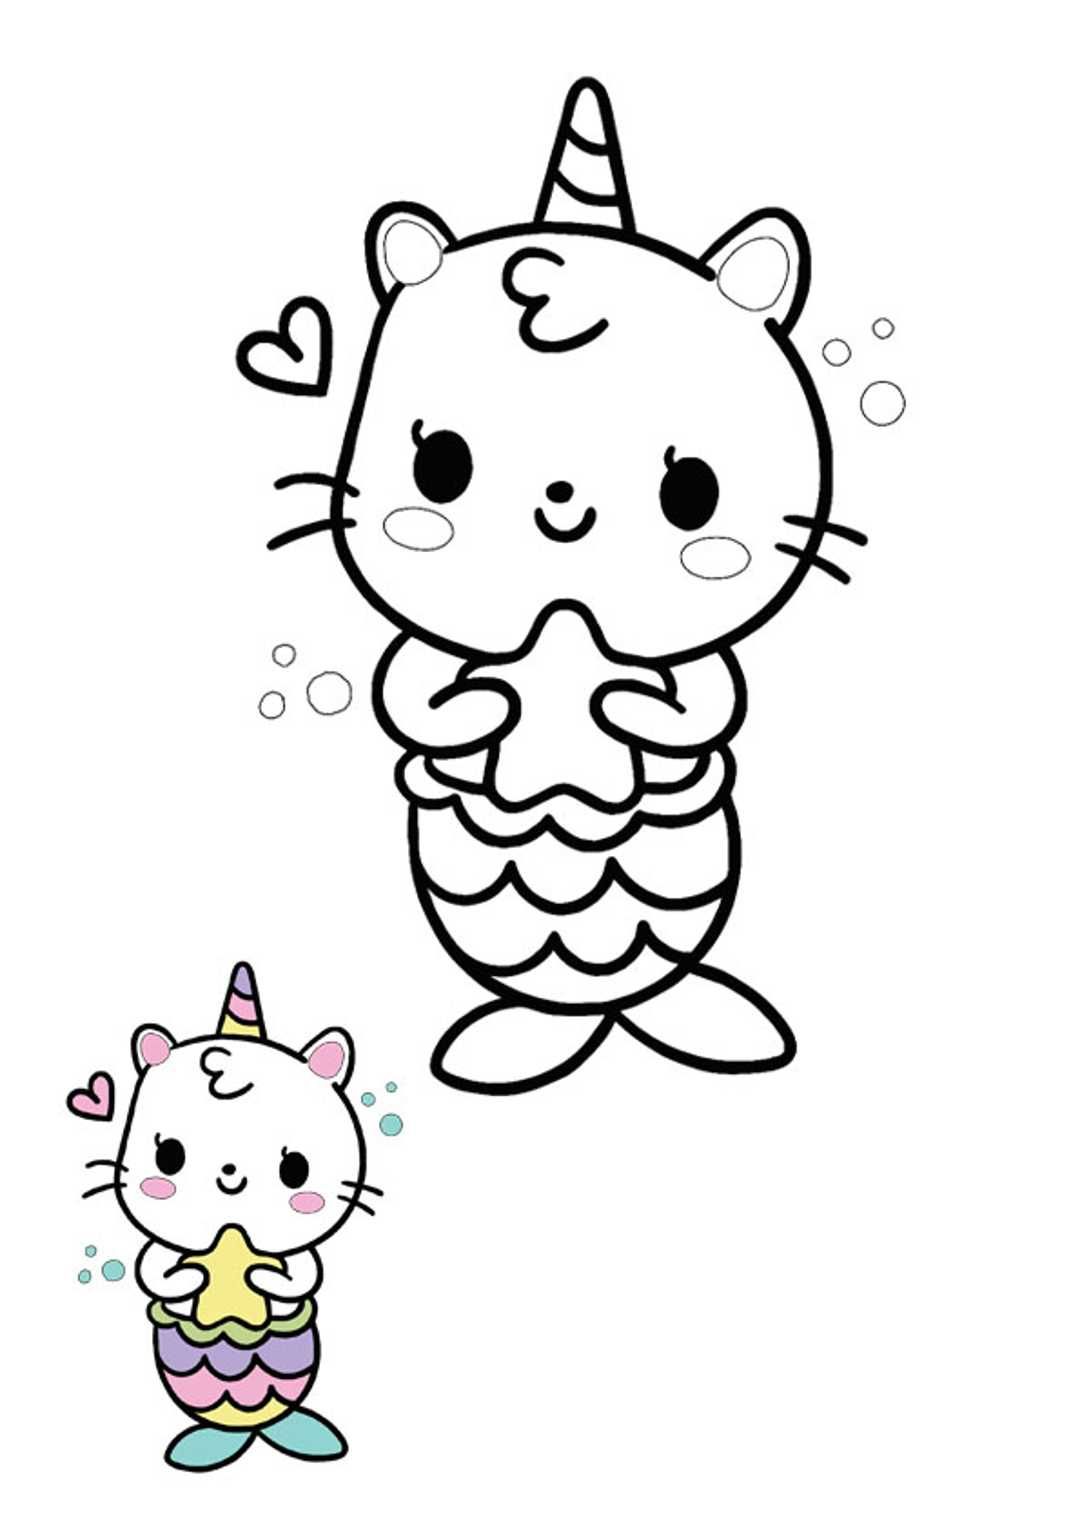 Mermaid Cat Coloring Pages   Coloring Home